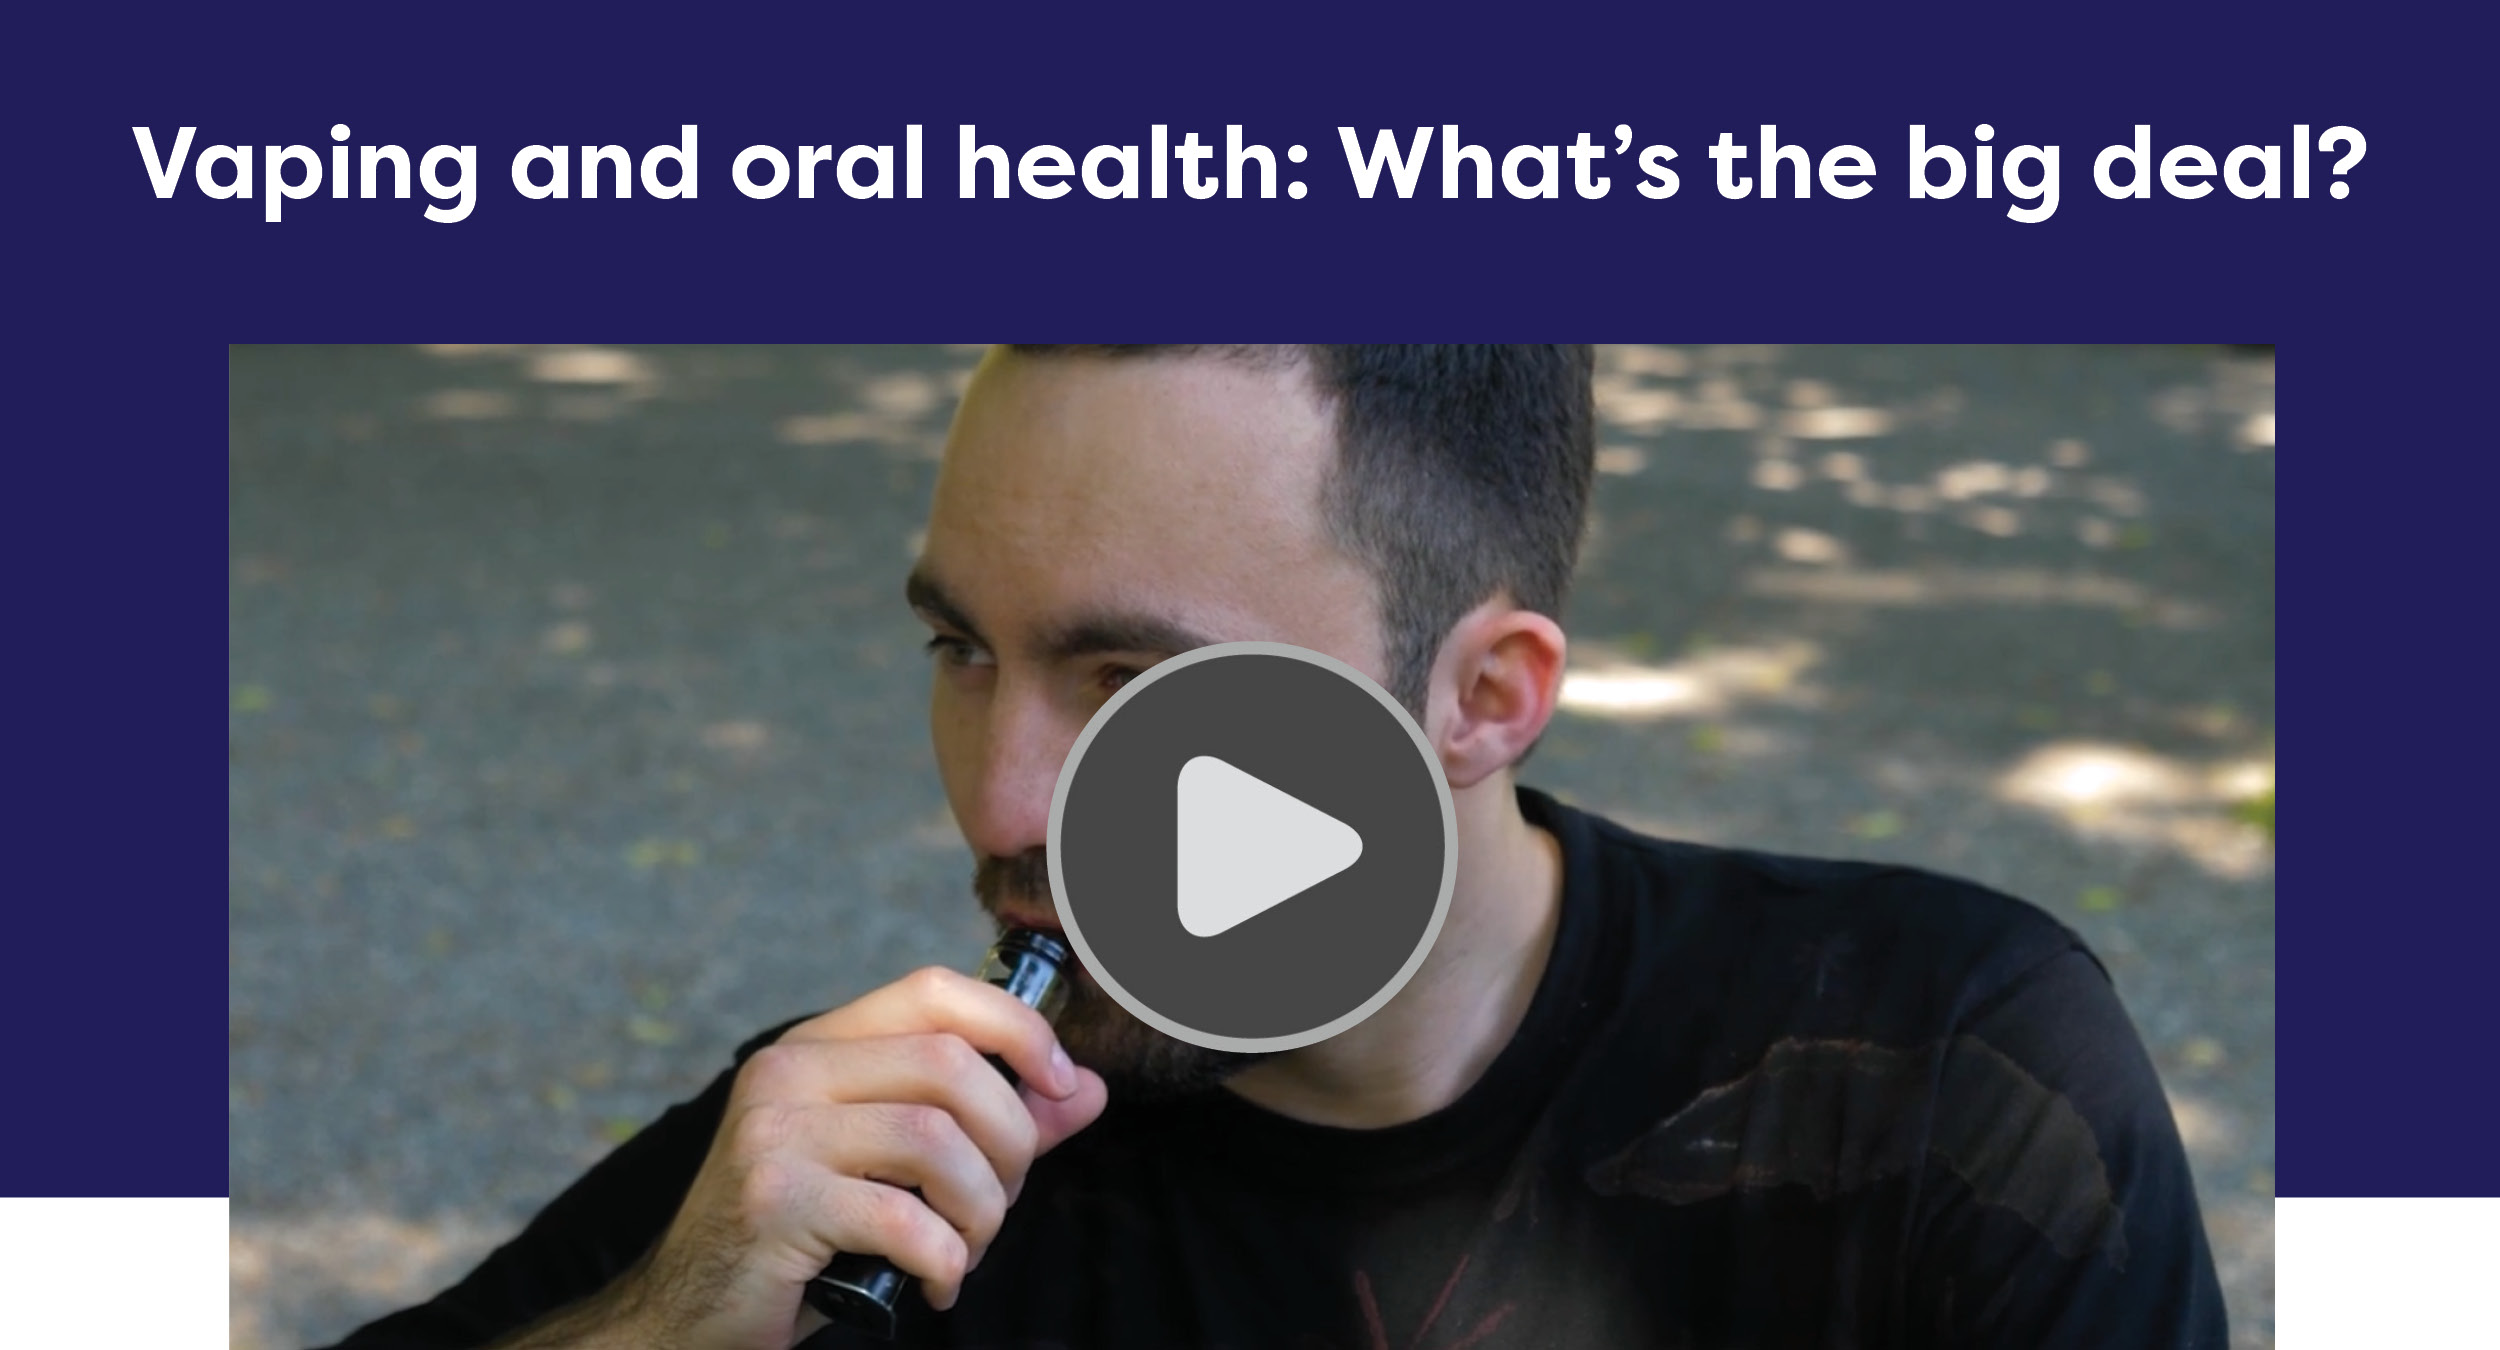 Vaping and oral health: What's the big deal?